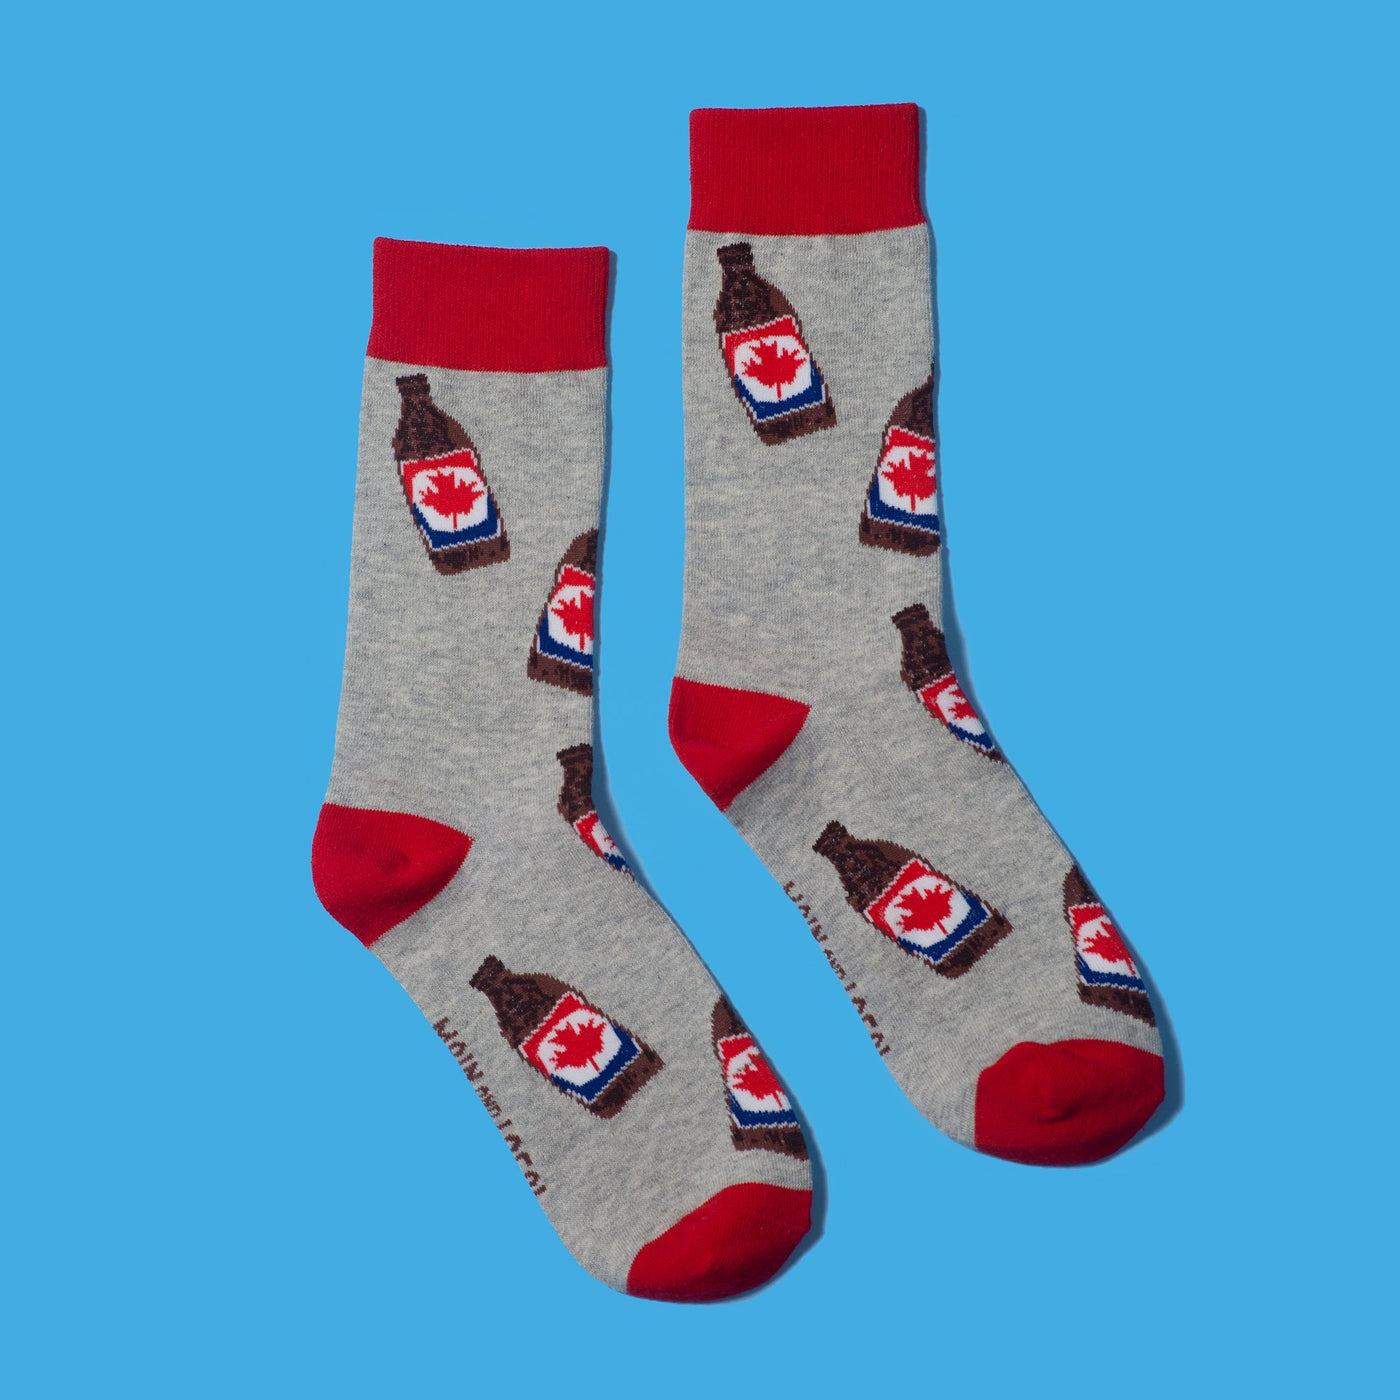 "Canadian Beer Socks" Cotton Crew Socks by Main & Local